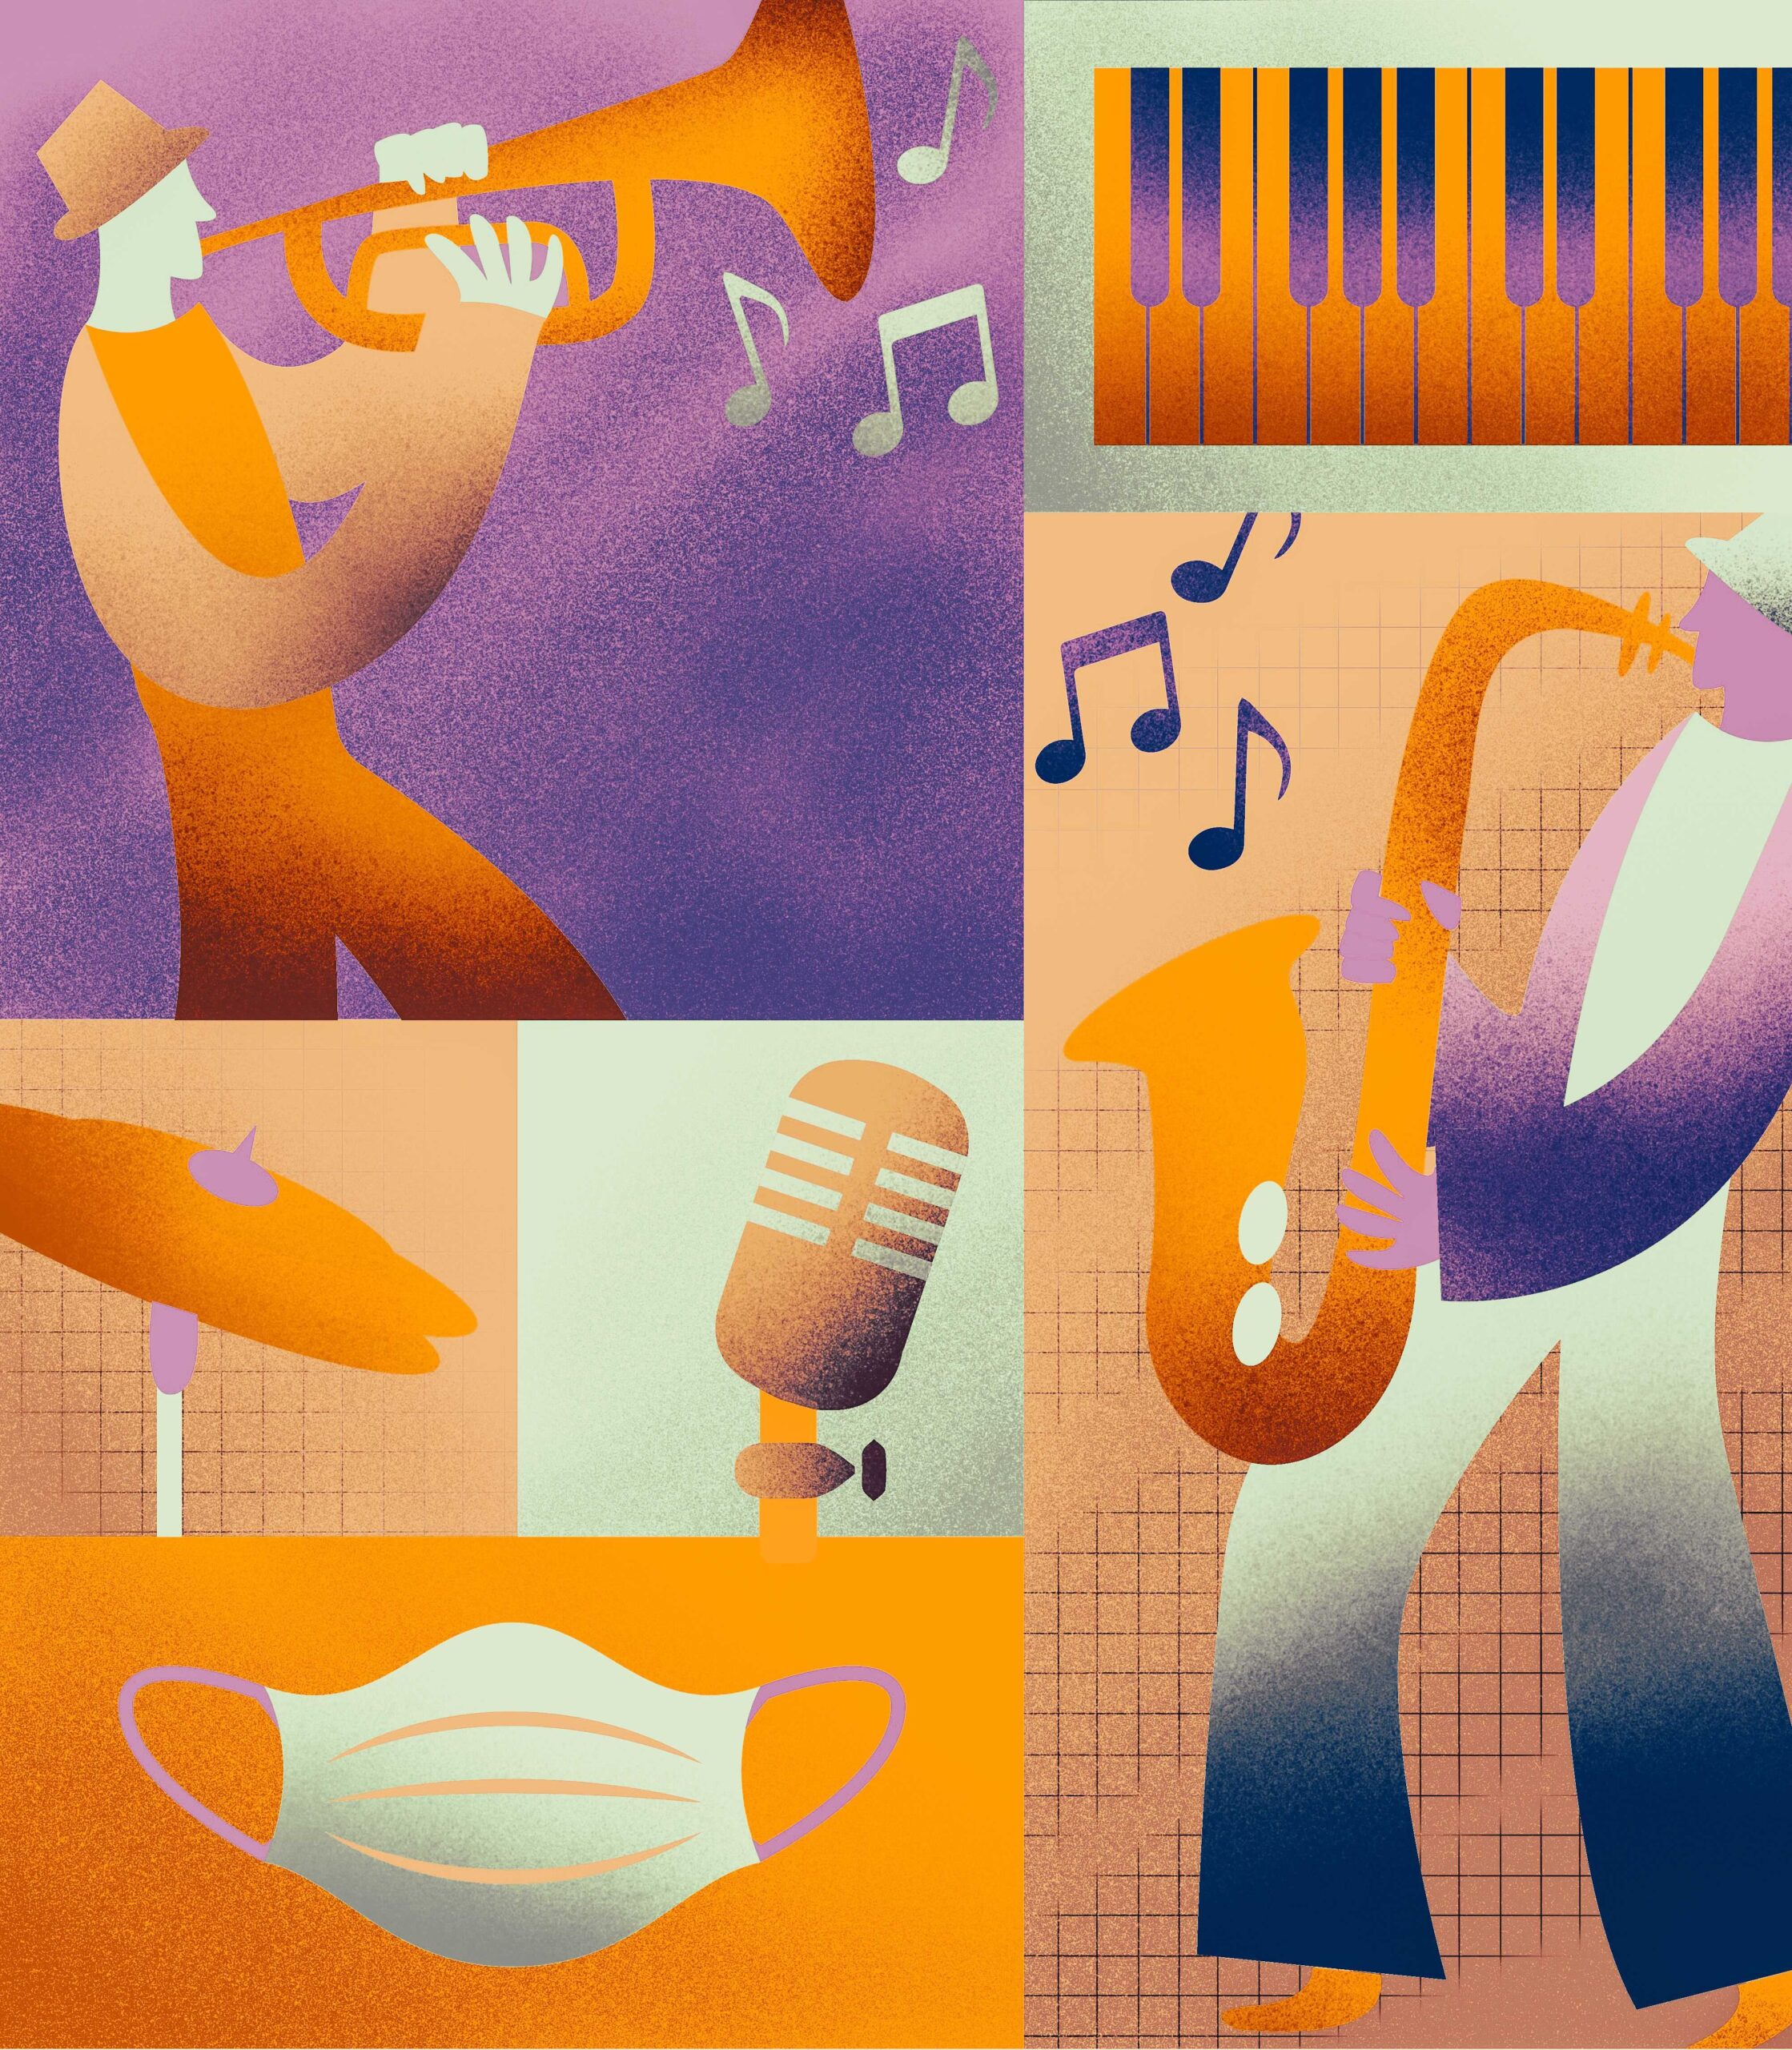 Purple and orange figures play the trumpet and saxophone with music notes floating across the frame. There is a keyboard, symbol, microphone, and mask in smaller boxes in the frame.